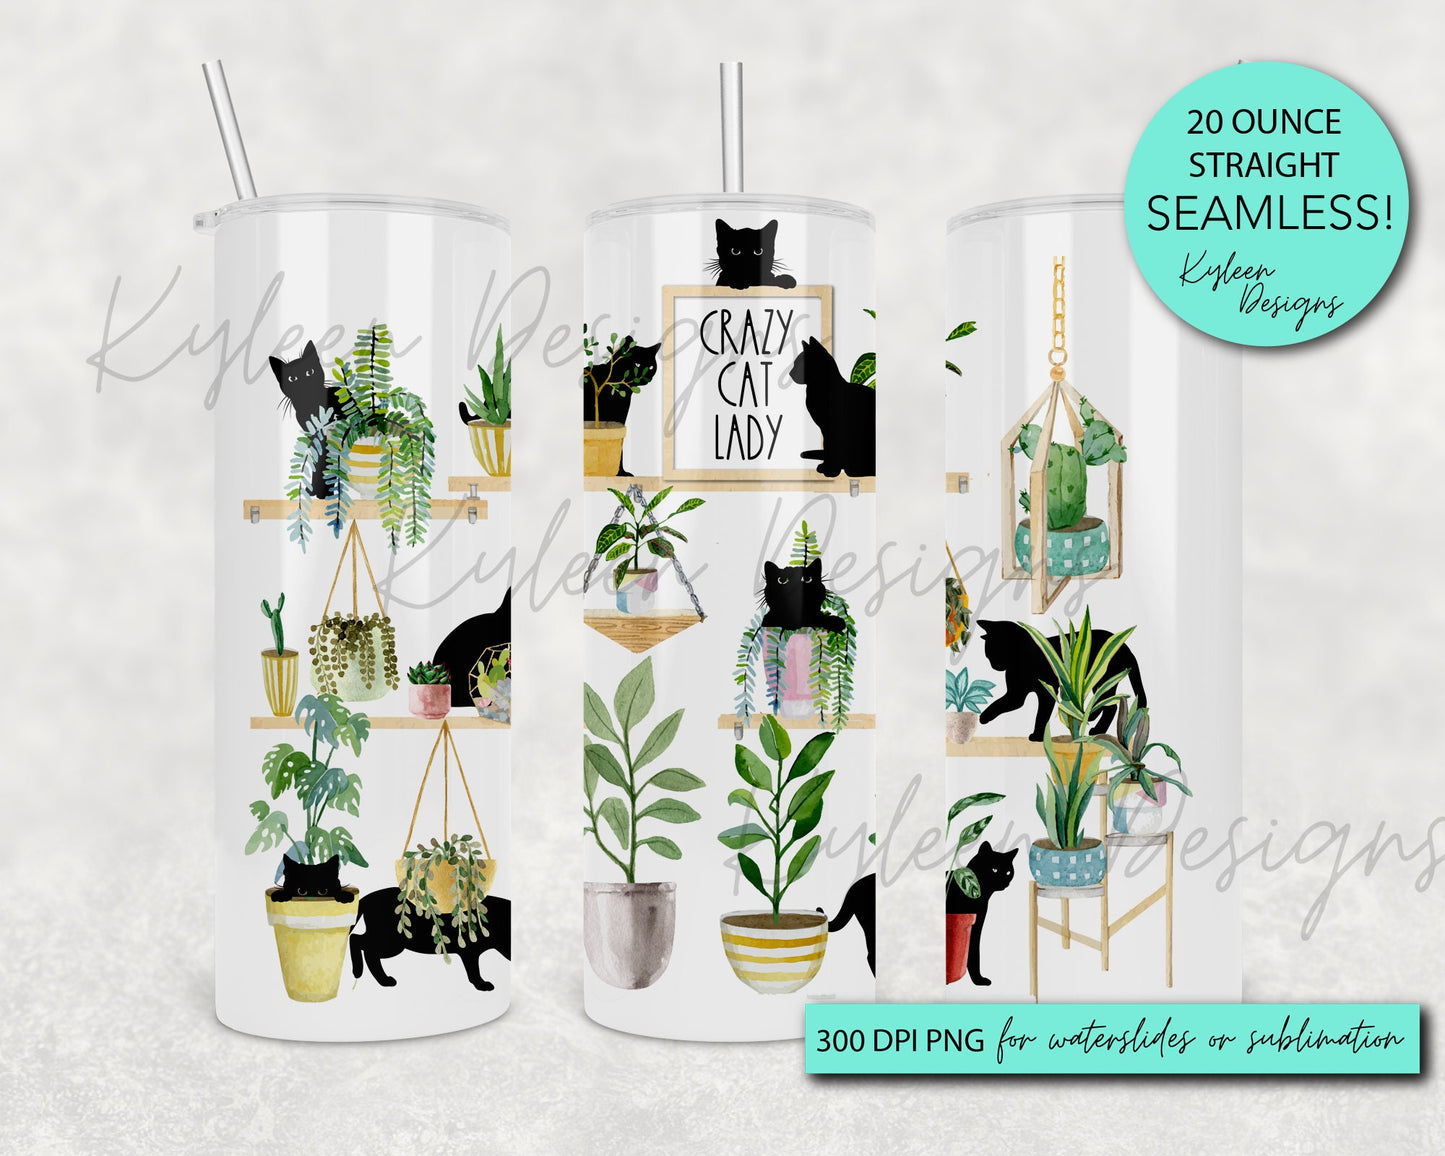 Seamless crazy cat lady 20 ounce straight wrap  for sublimation, waterslide High res PNG digital file